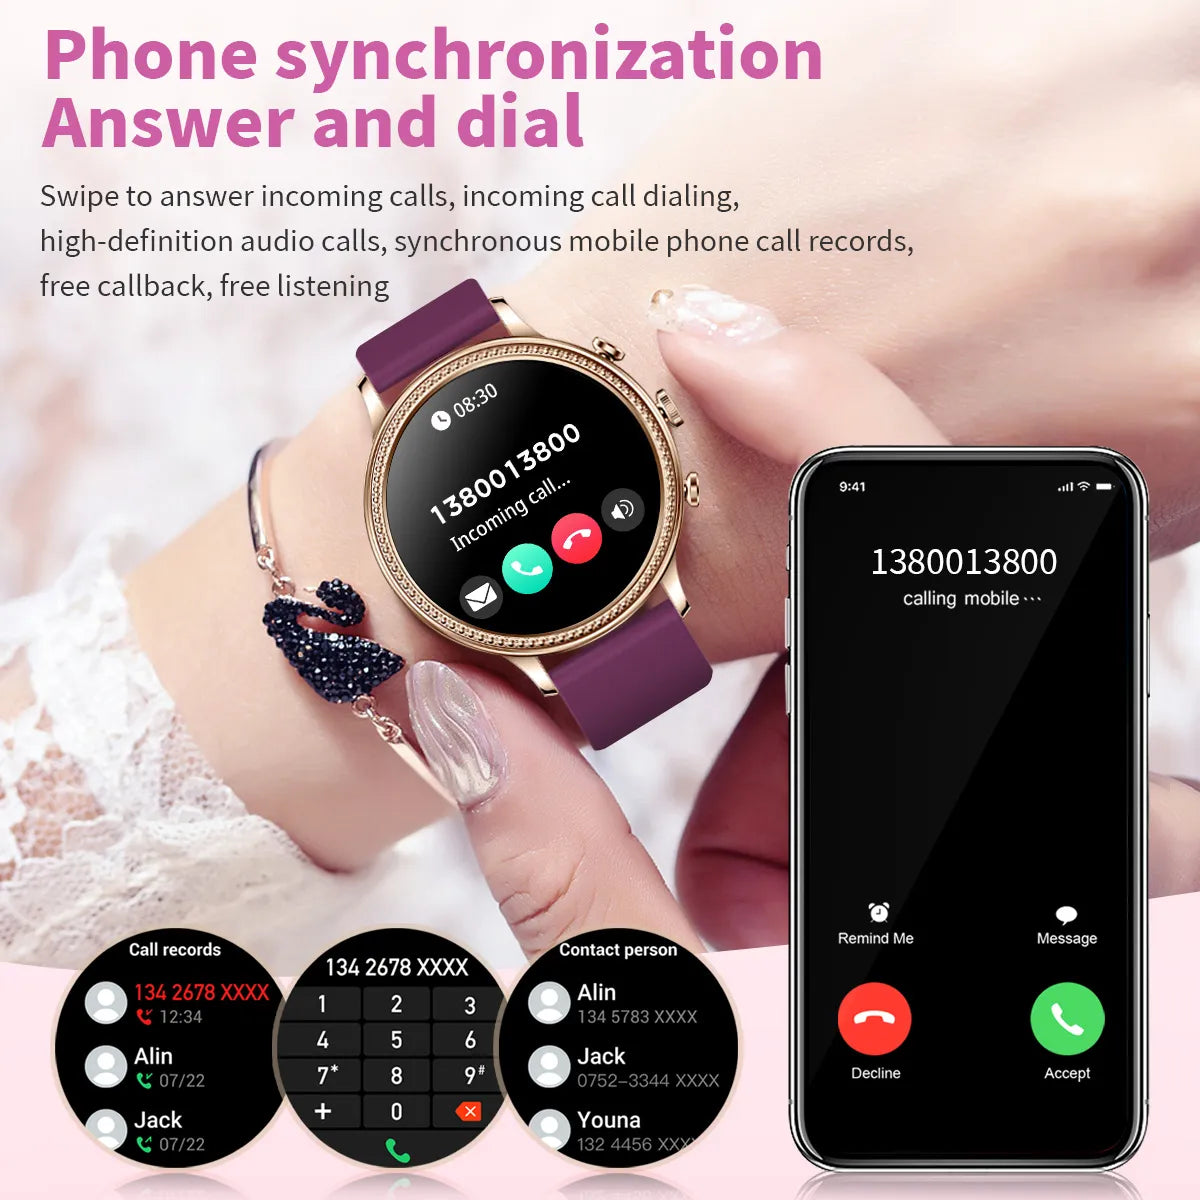 Luxury Smart Watches For Women Bluetooth Call Connected Phone Women Watch Health Monitor Sports Smartwatch 2023 Women Gift - Sellinashop